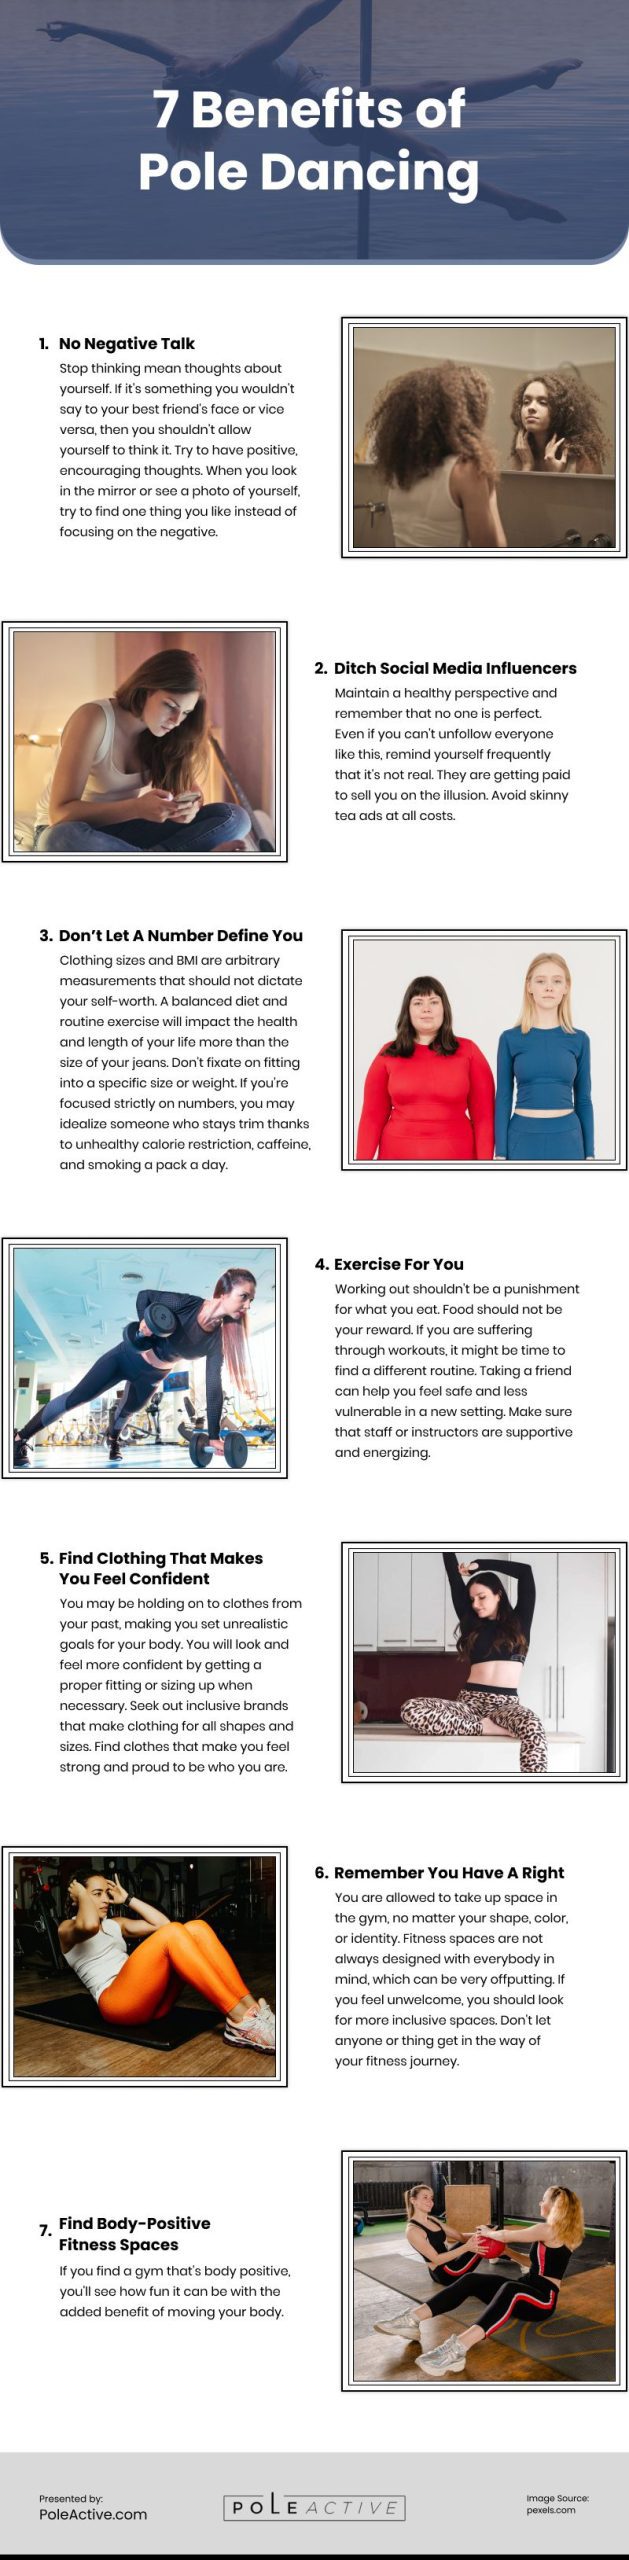 7 Benefits of Pole Dancing Infographic